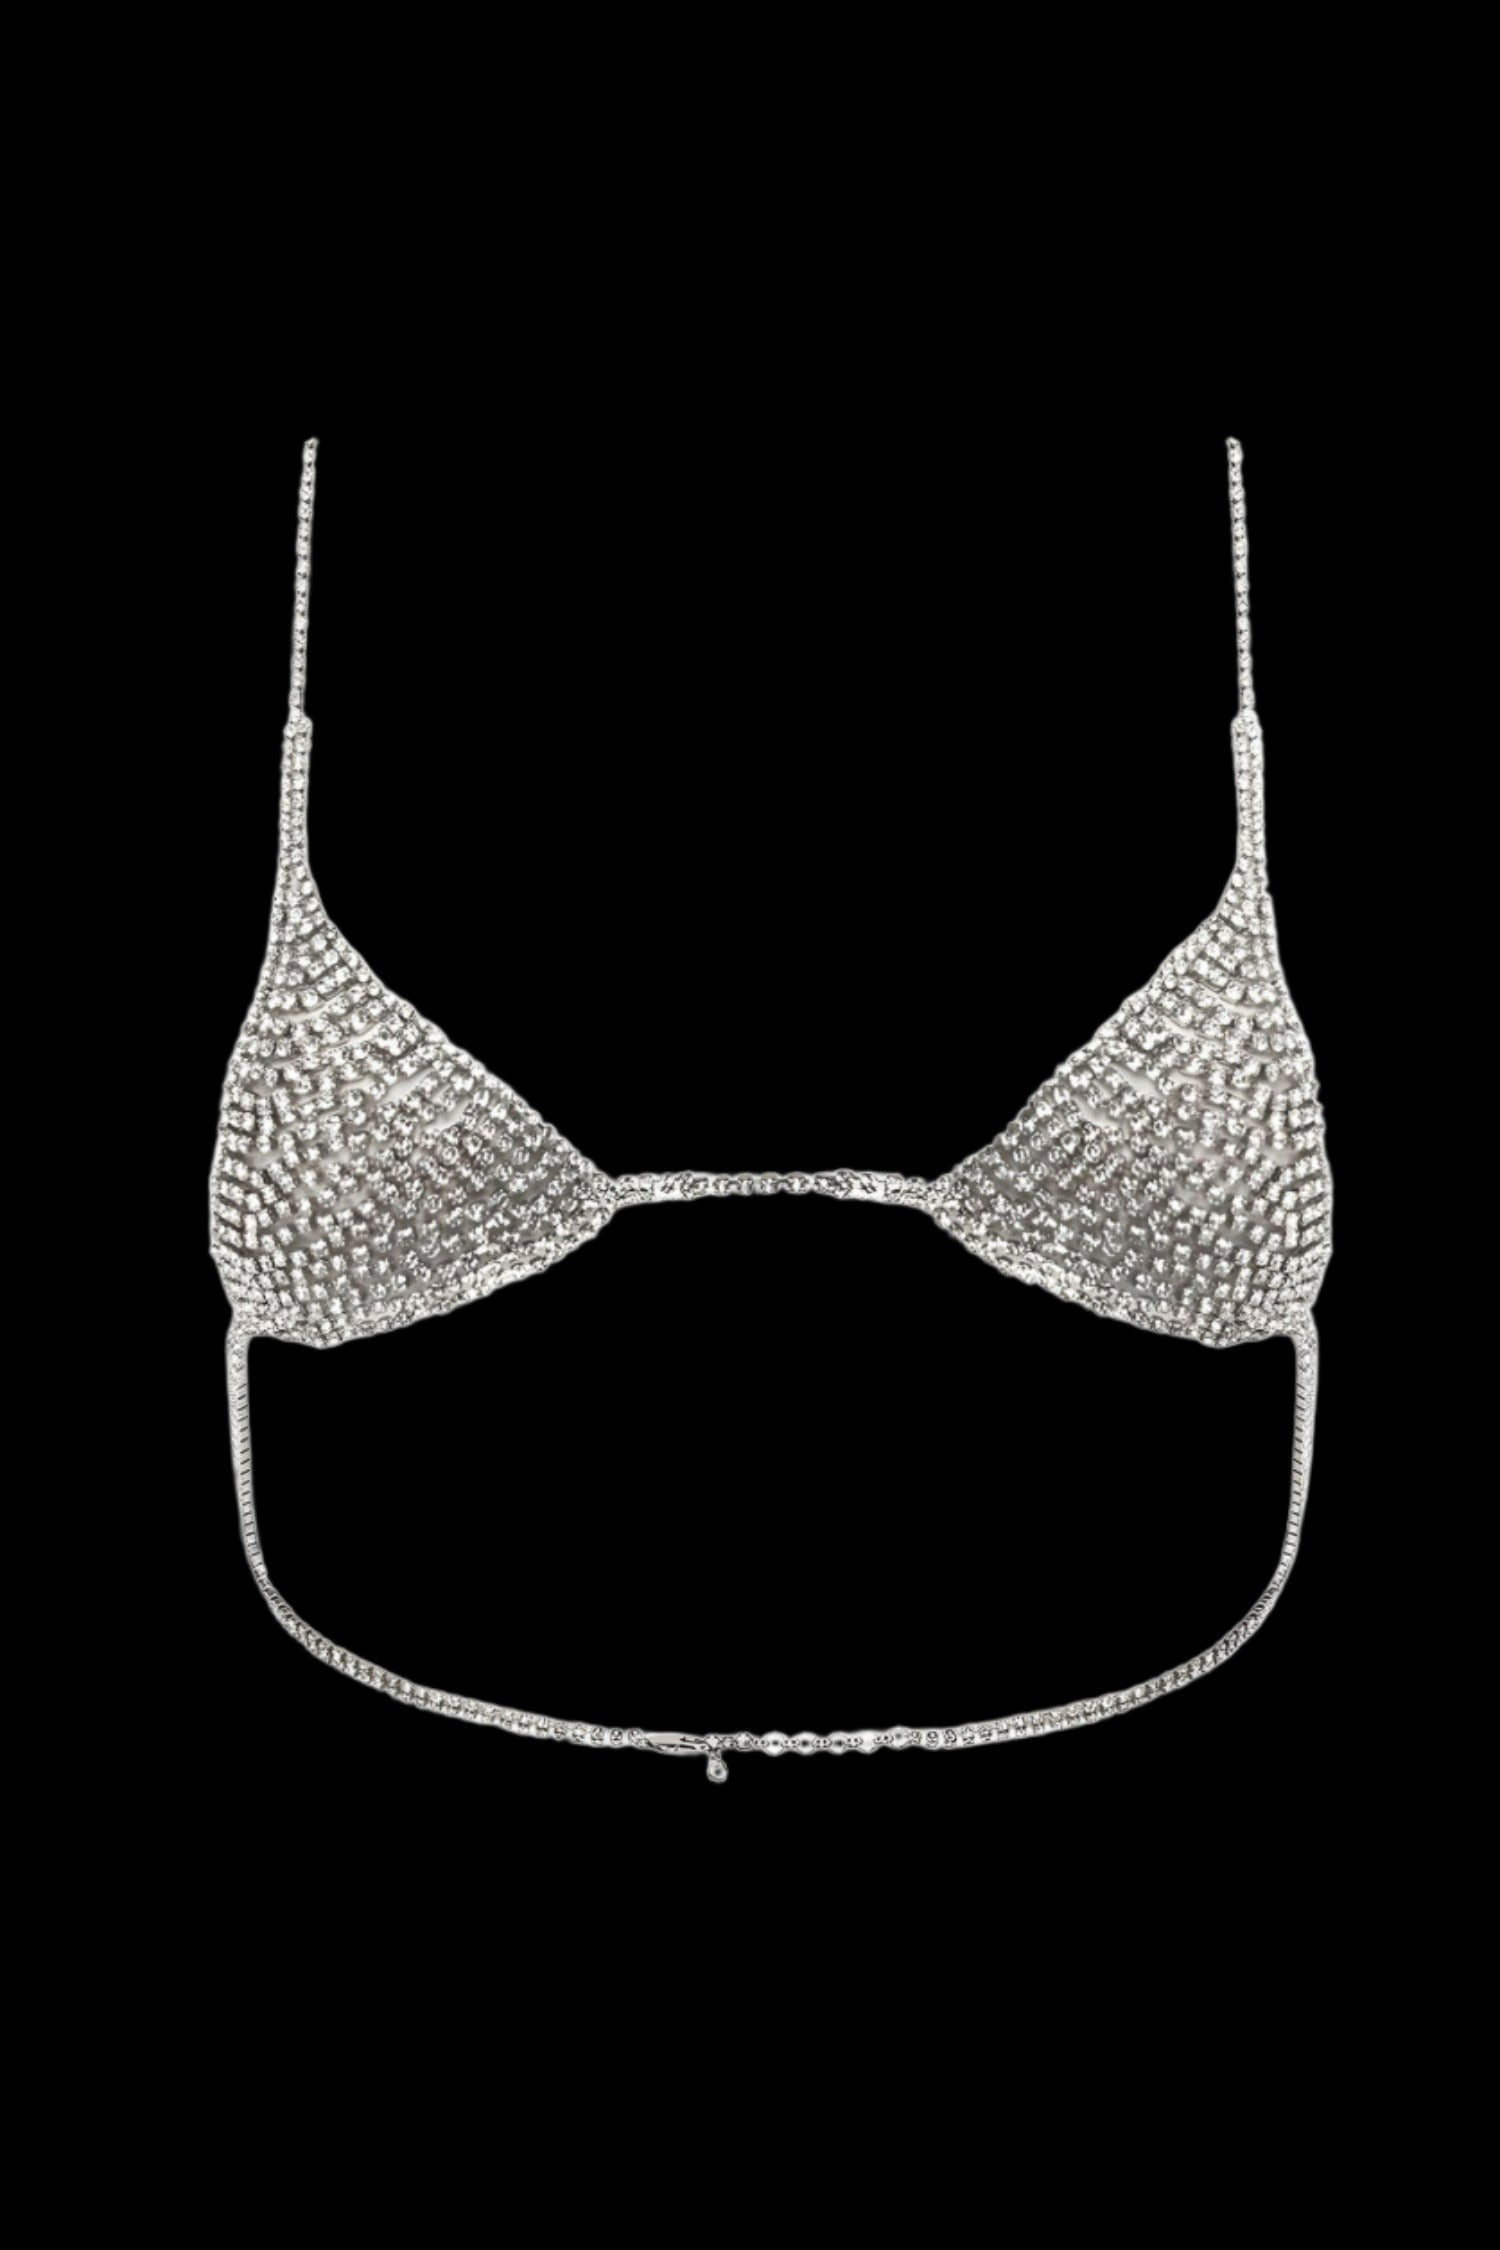 Teeny Tiny Bedazzled Bralette - Silver